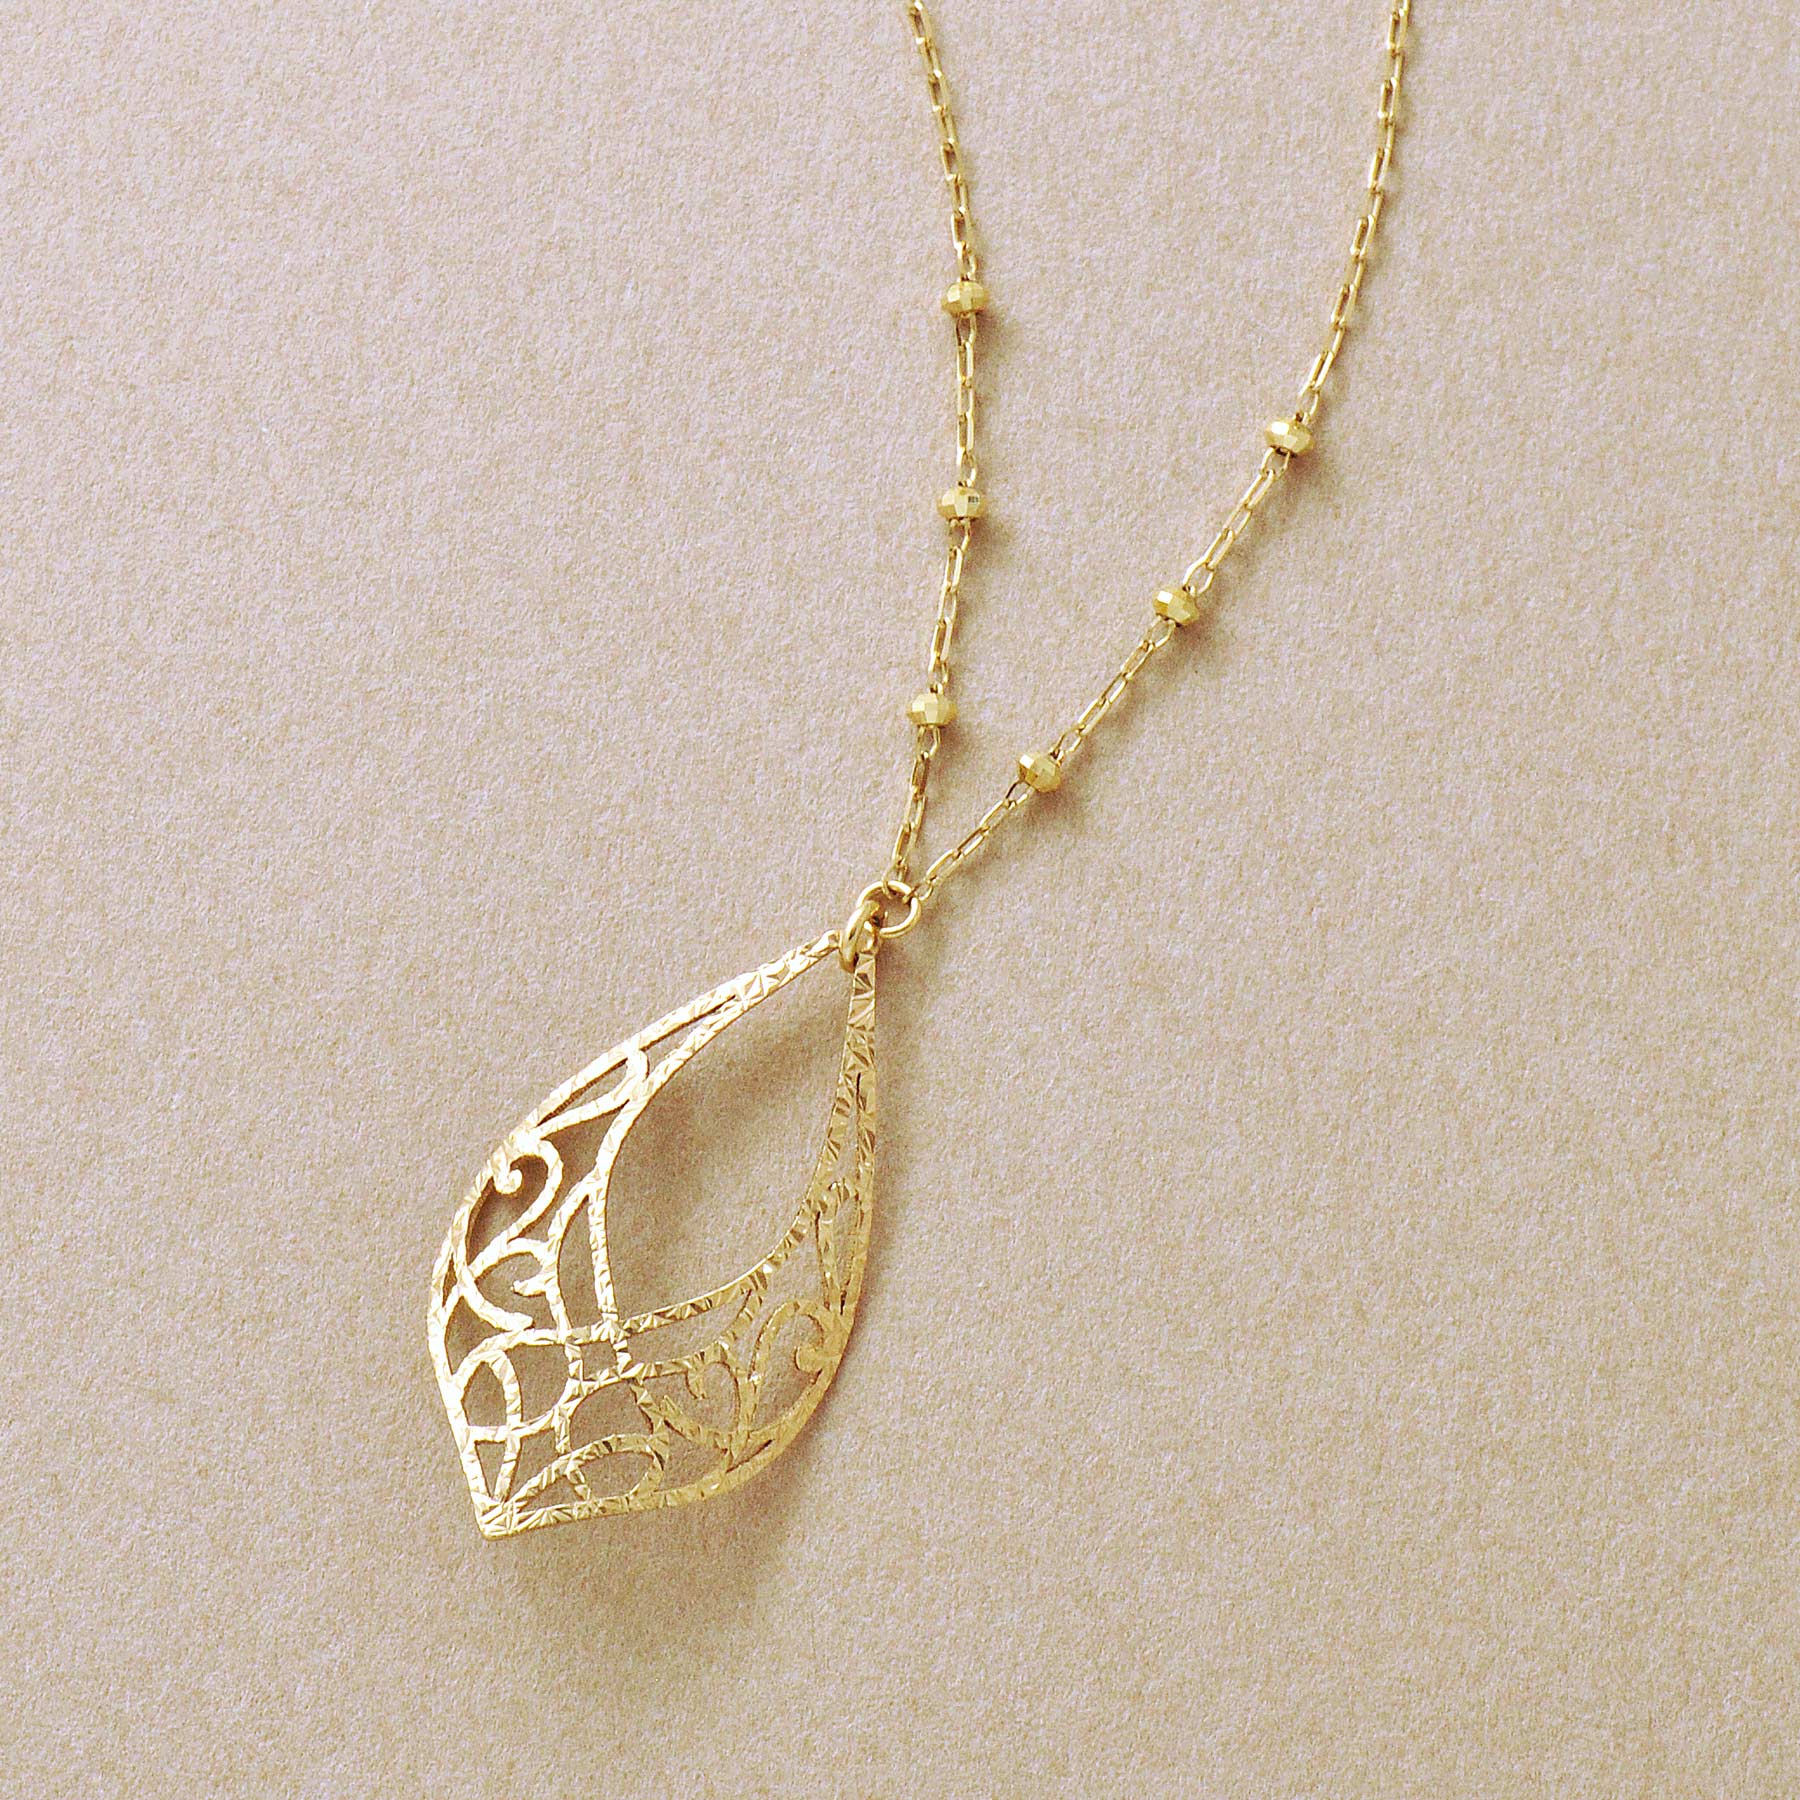 10K Open Work Leaf Design Necklace (Yellow Gold) - Product Image